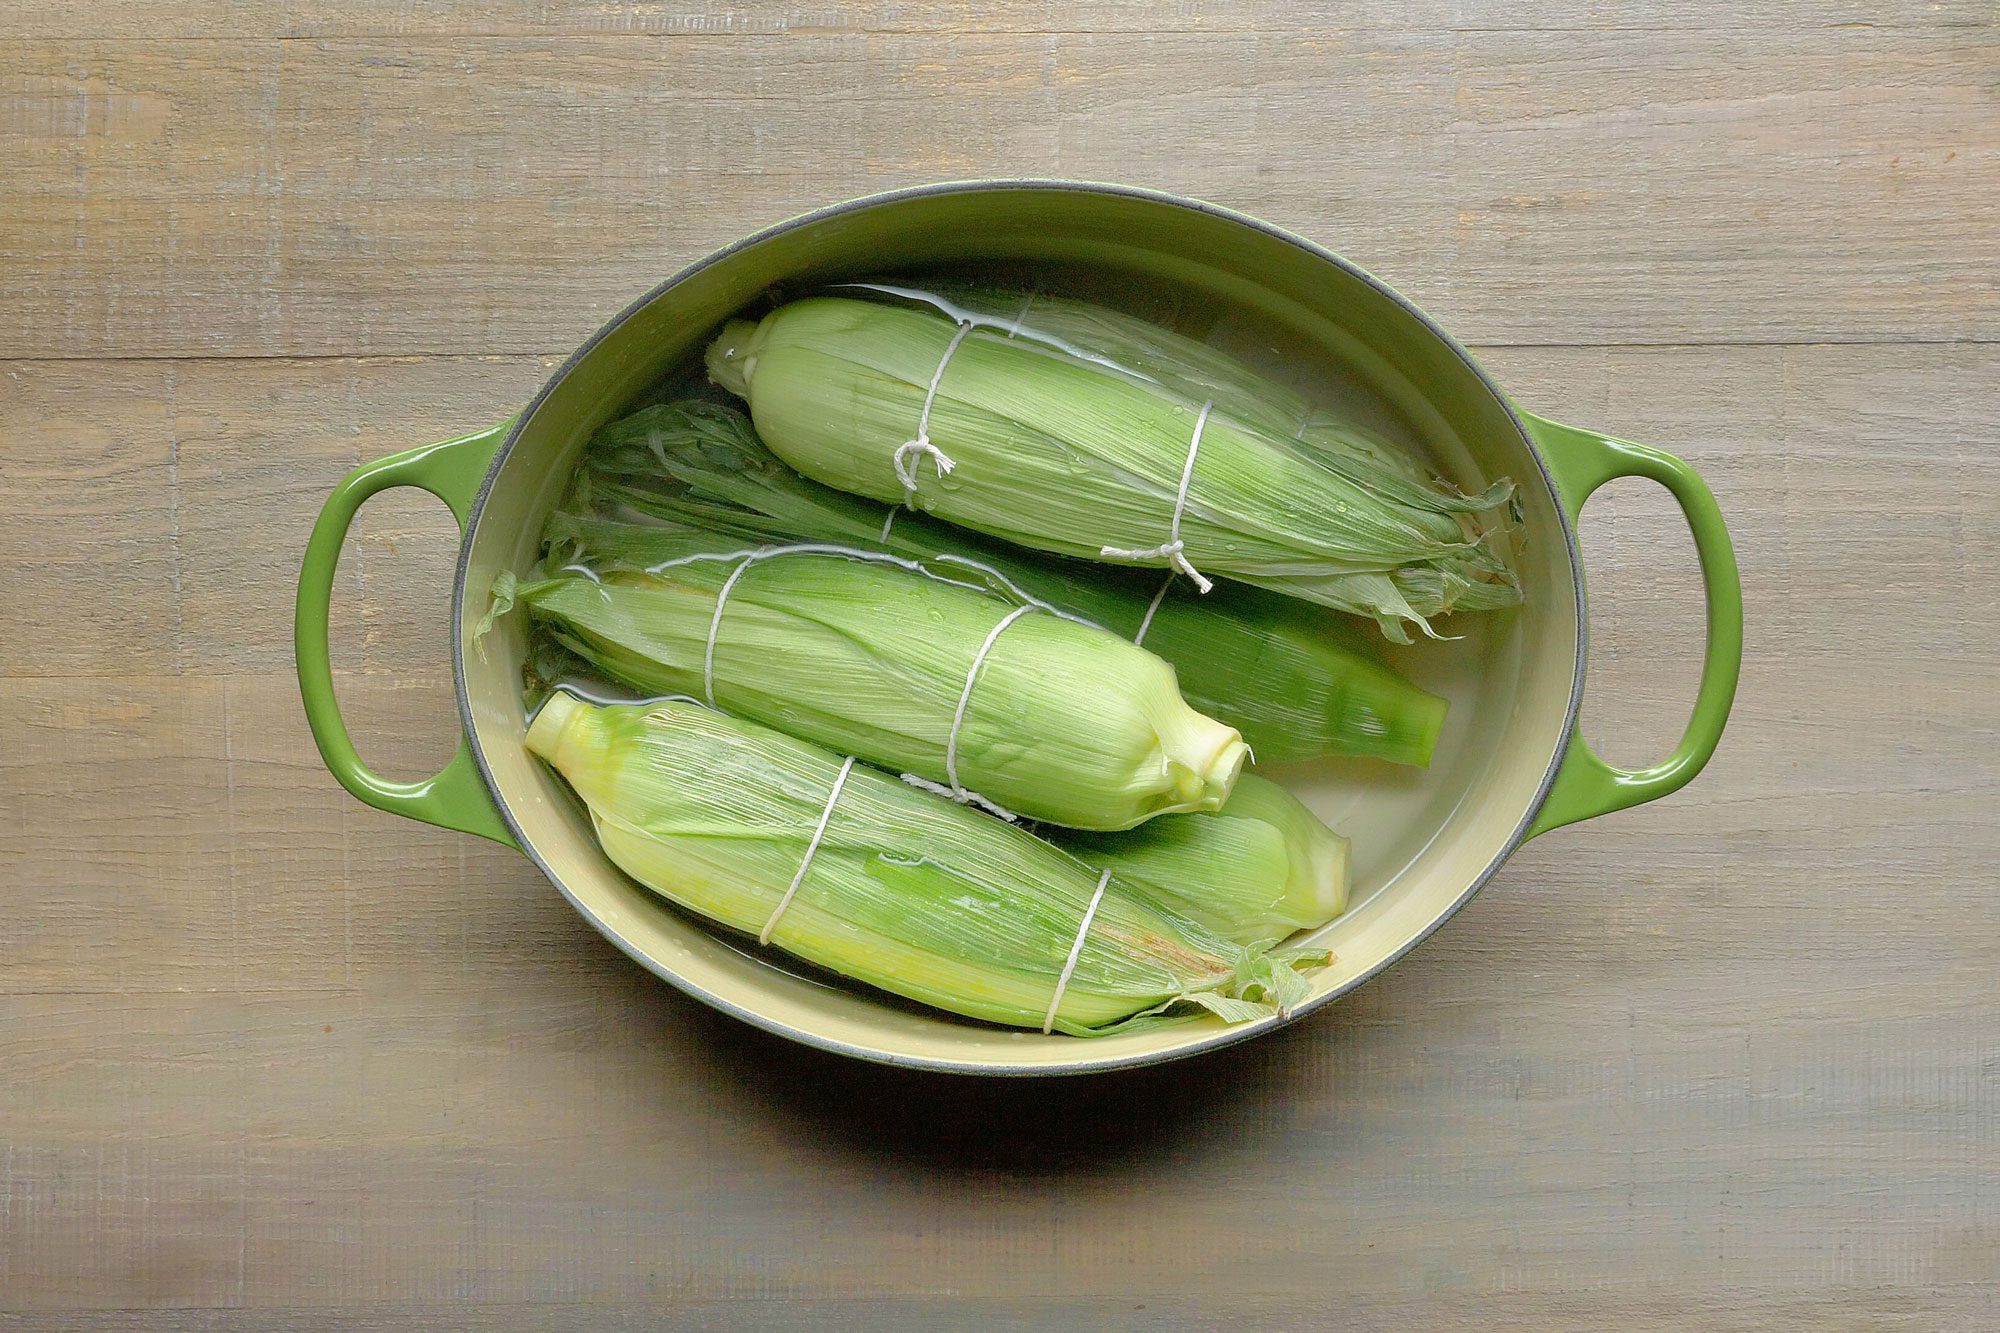 Soak the corn in cold water for 20 minutes